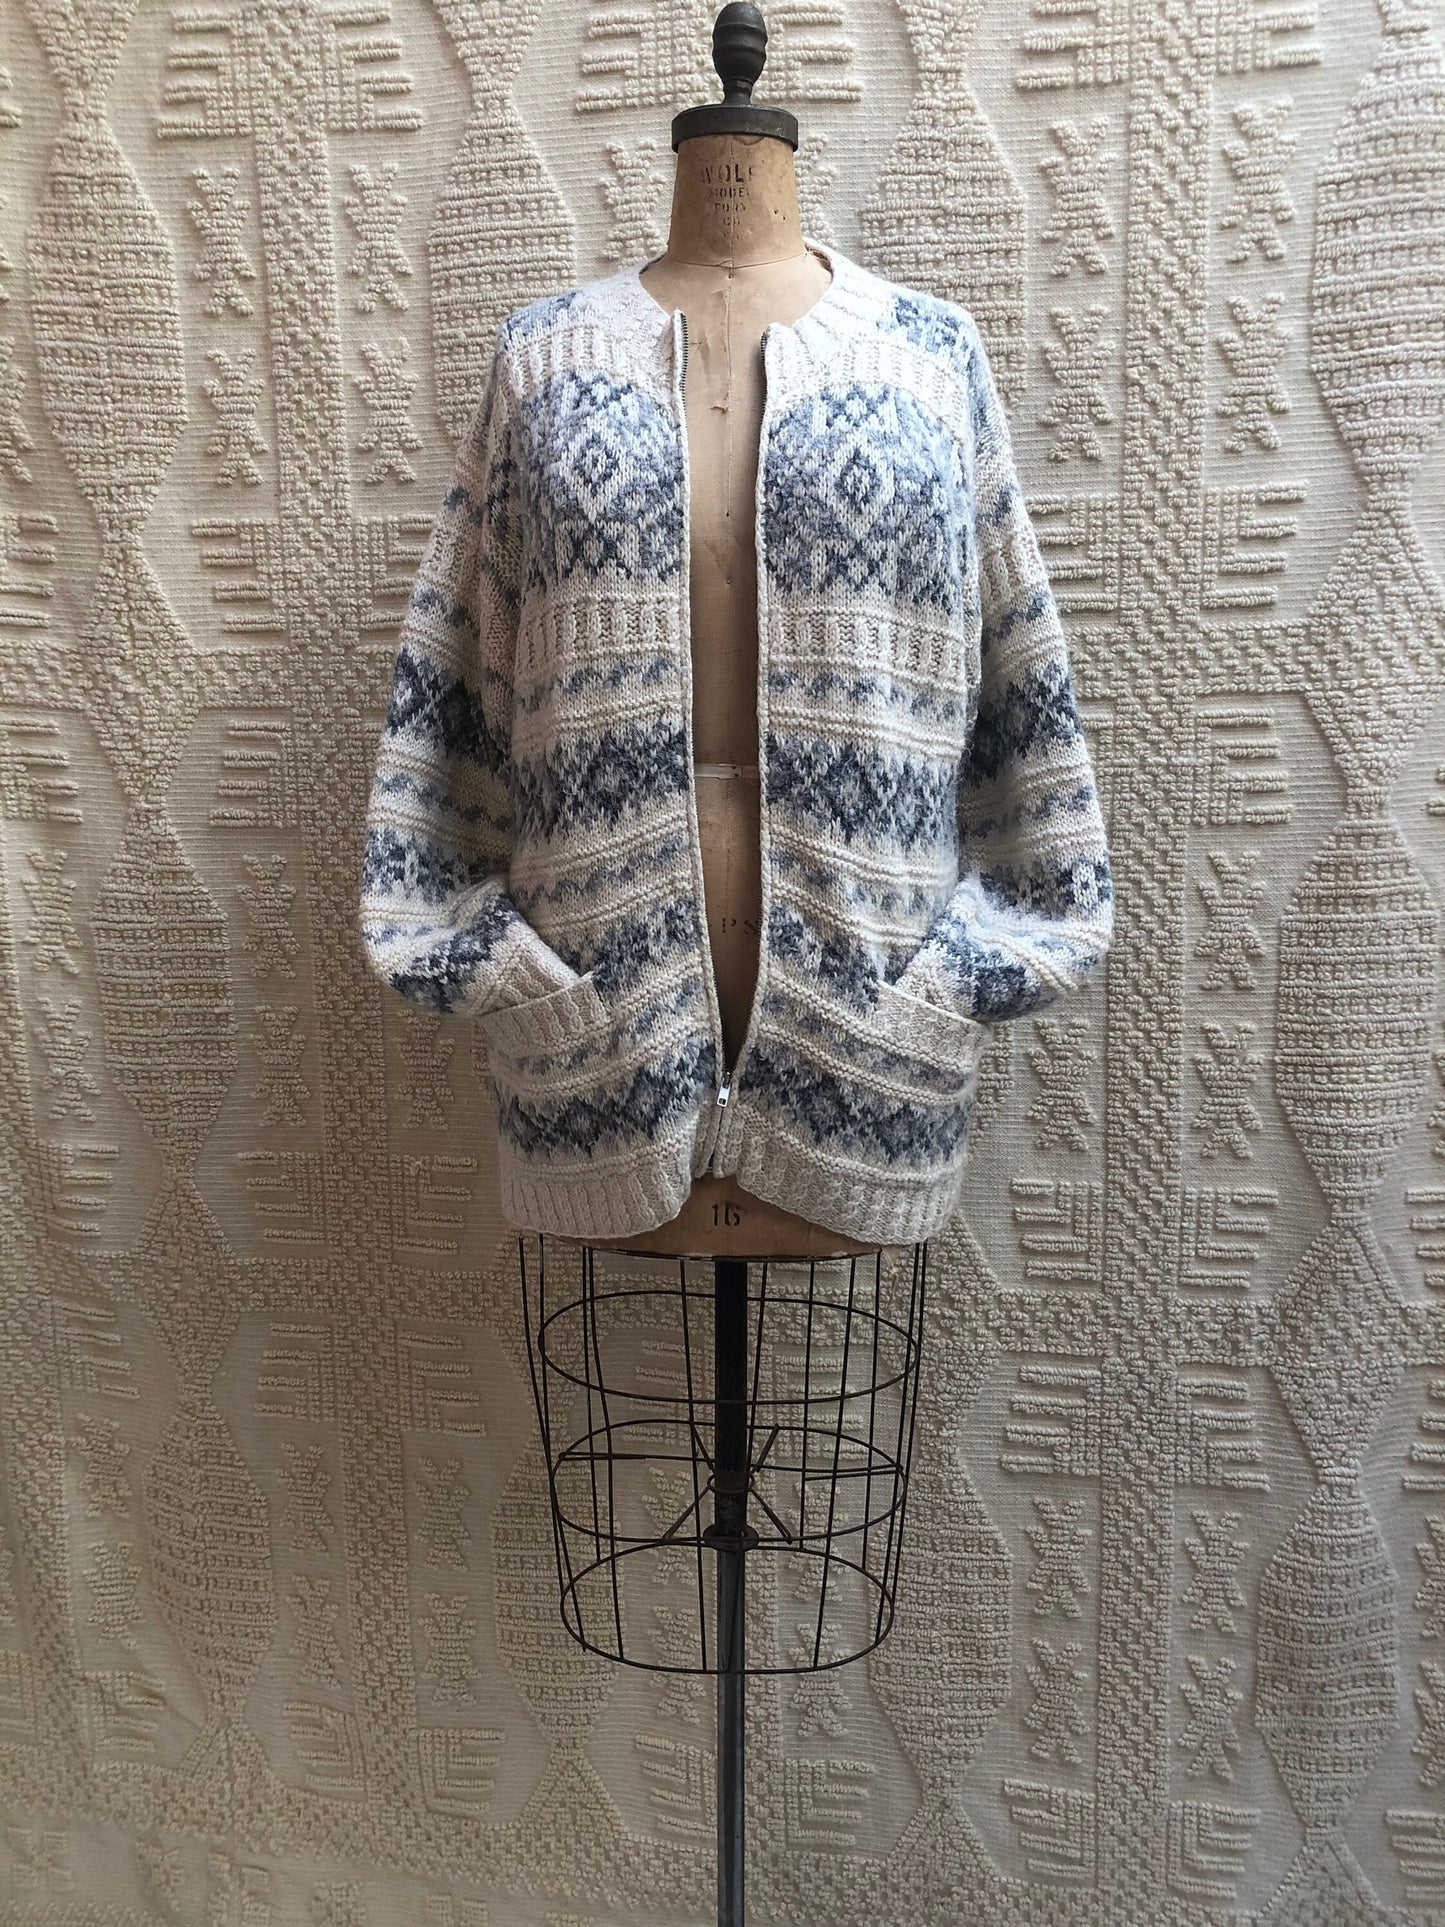 Vintage Hand Knit Wool Sweater Beige with Blue/Grey Accents Zipper